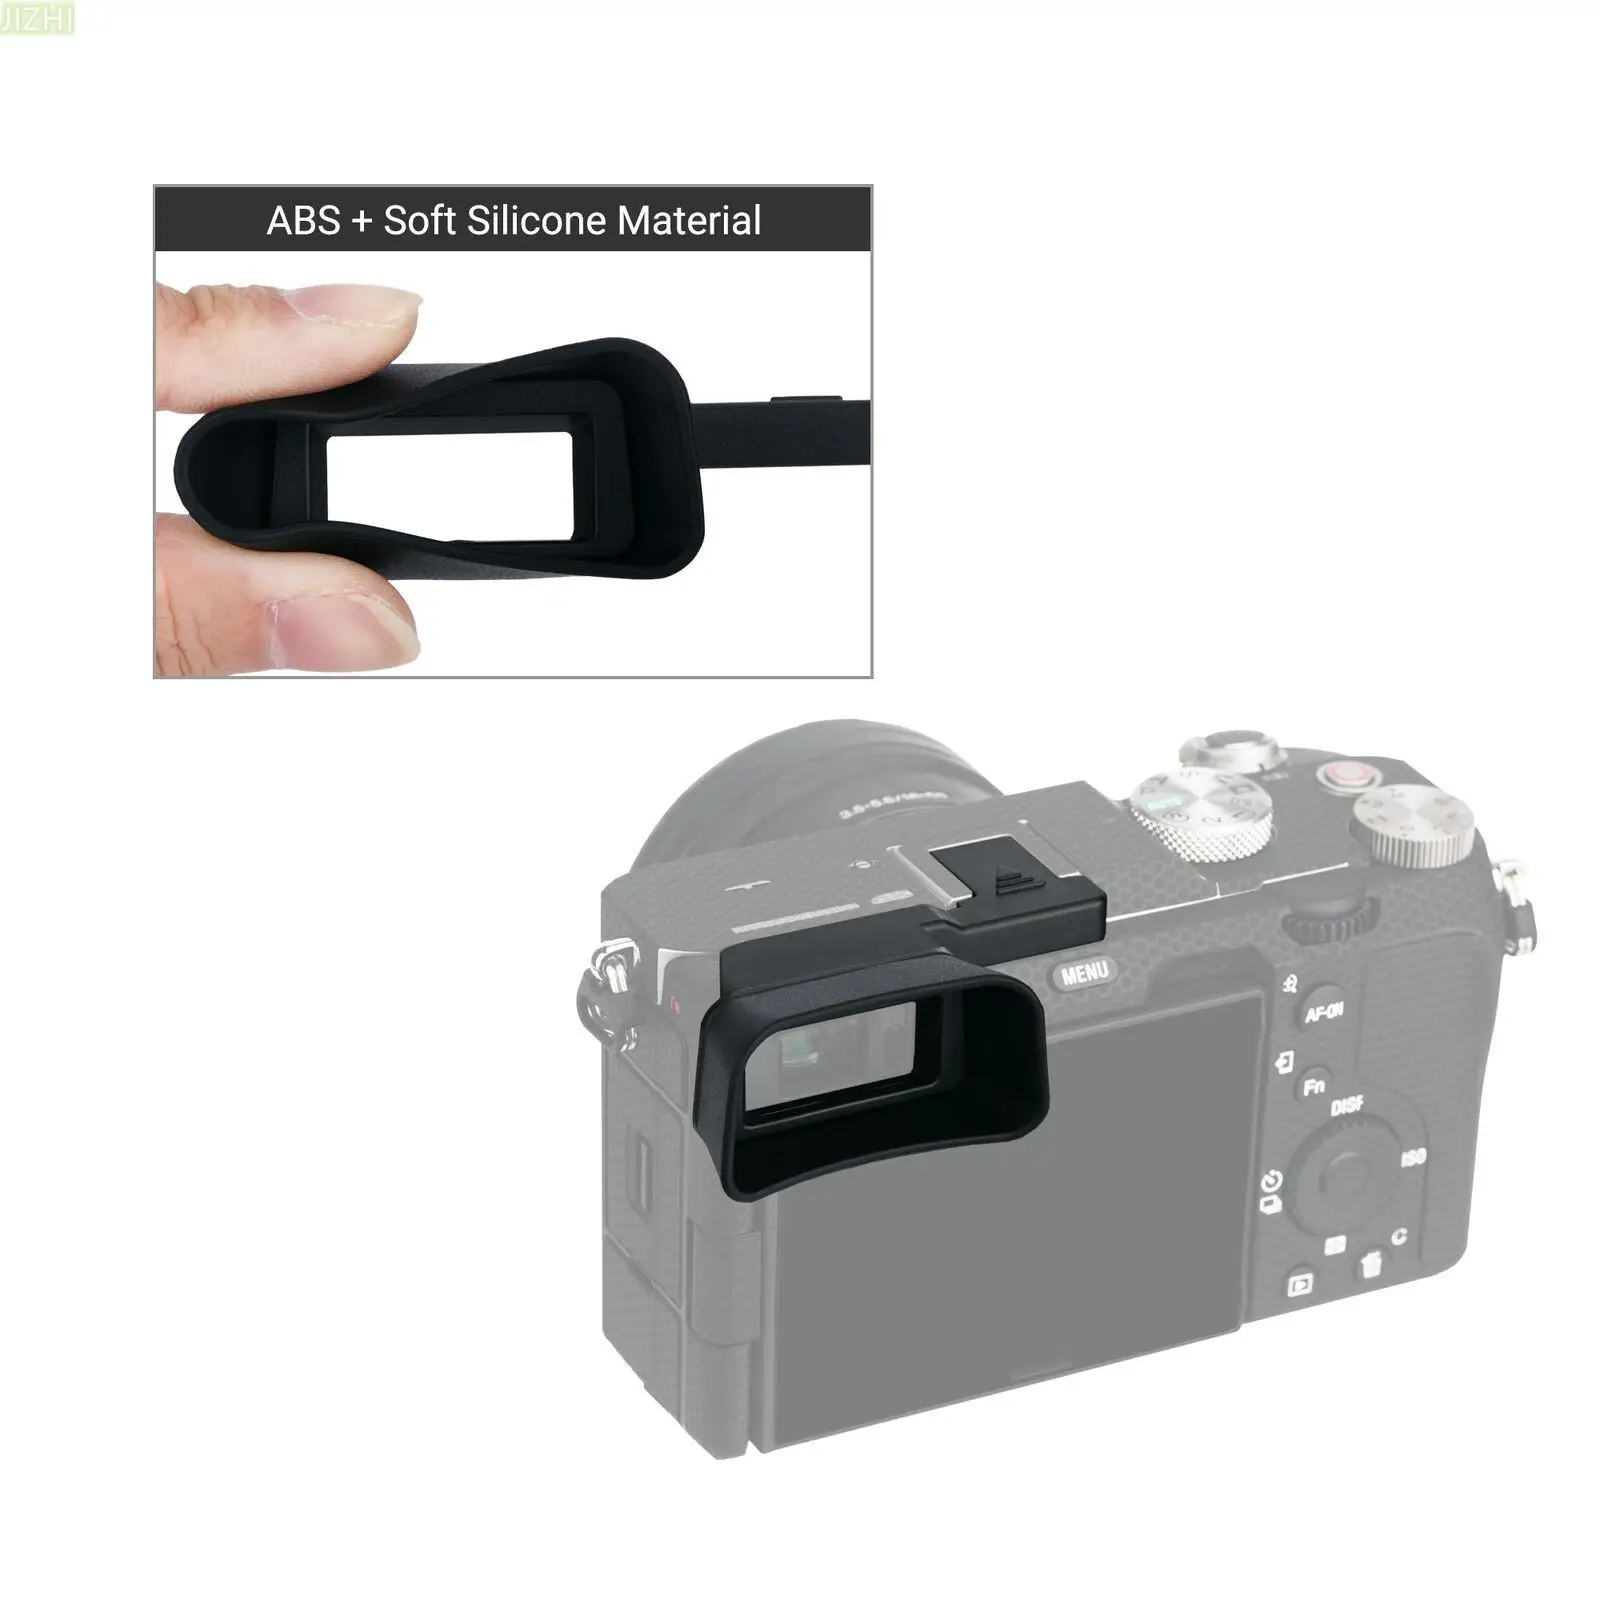 Ergonomic Extend Long Camera Eyecup Eyepiece Viewfinder Protective Protector Eye Cup For Sony A7C Alpha 7C ILCE-7C